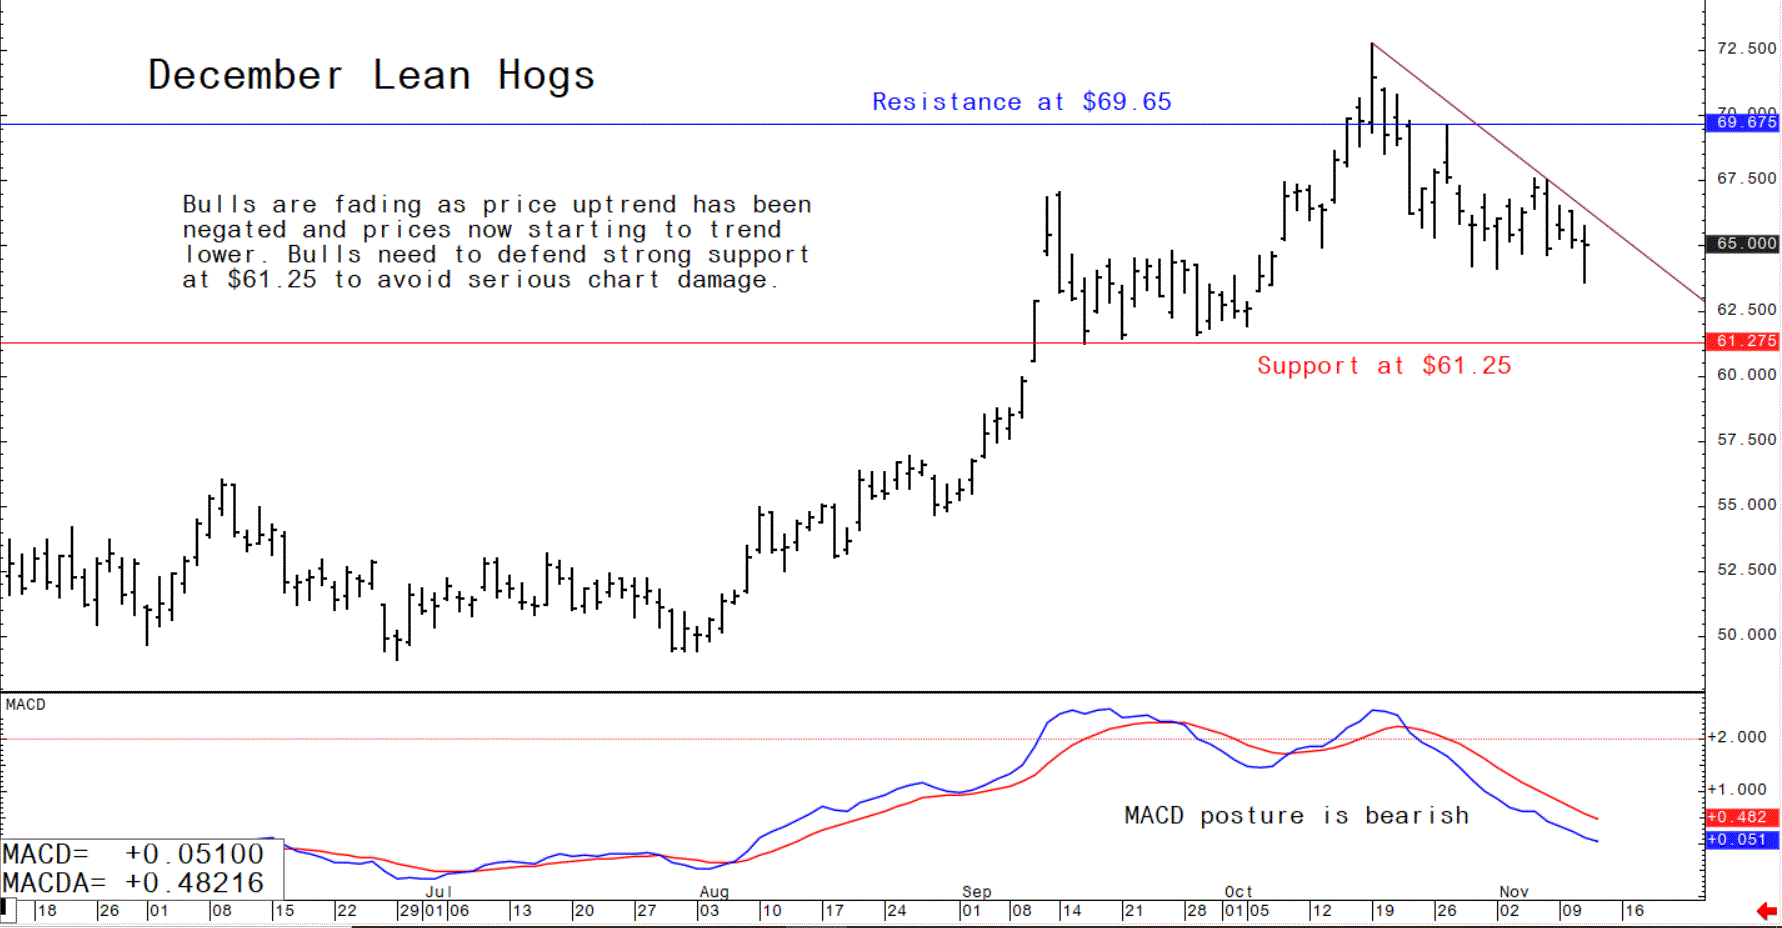 Graph showing the weekly trade in December US lean hog futures